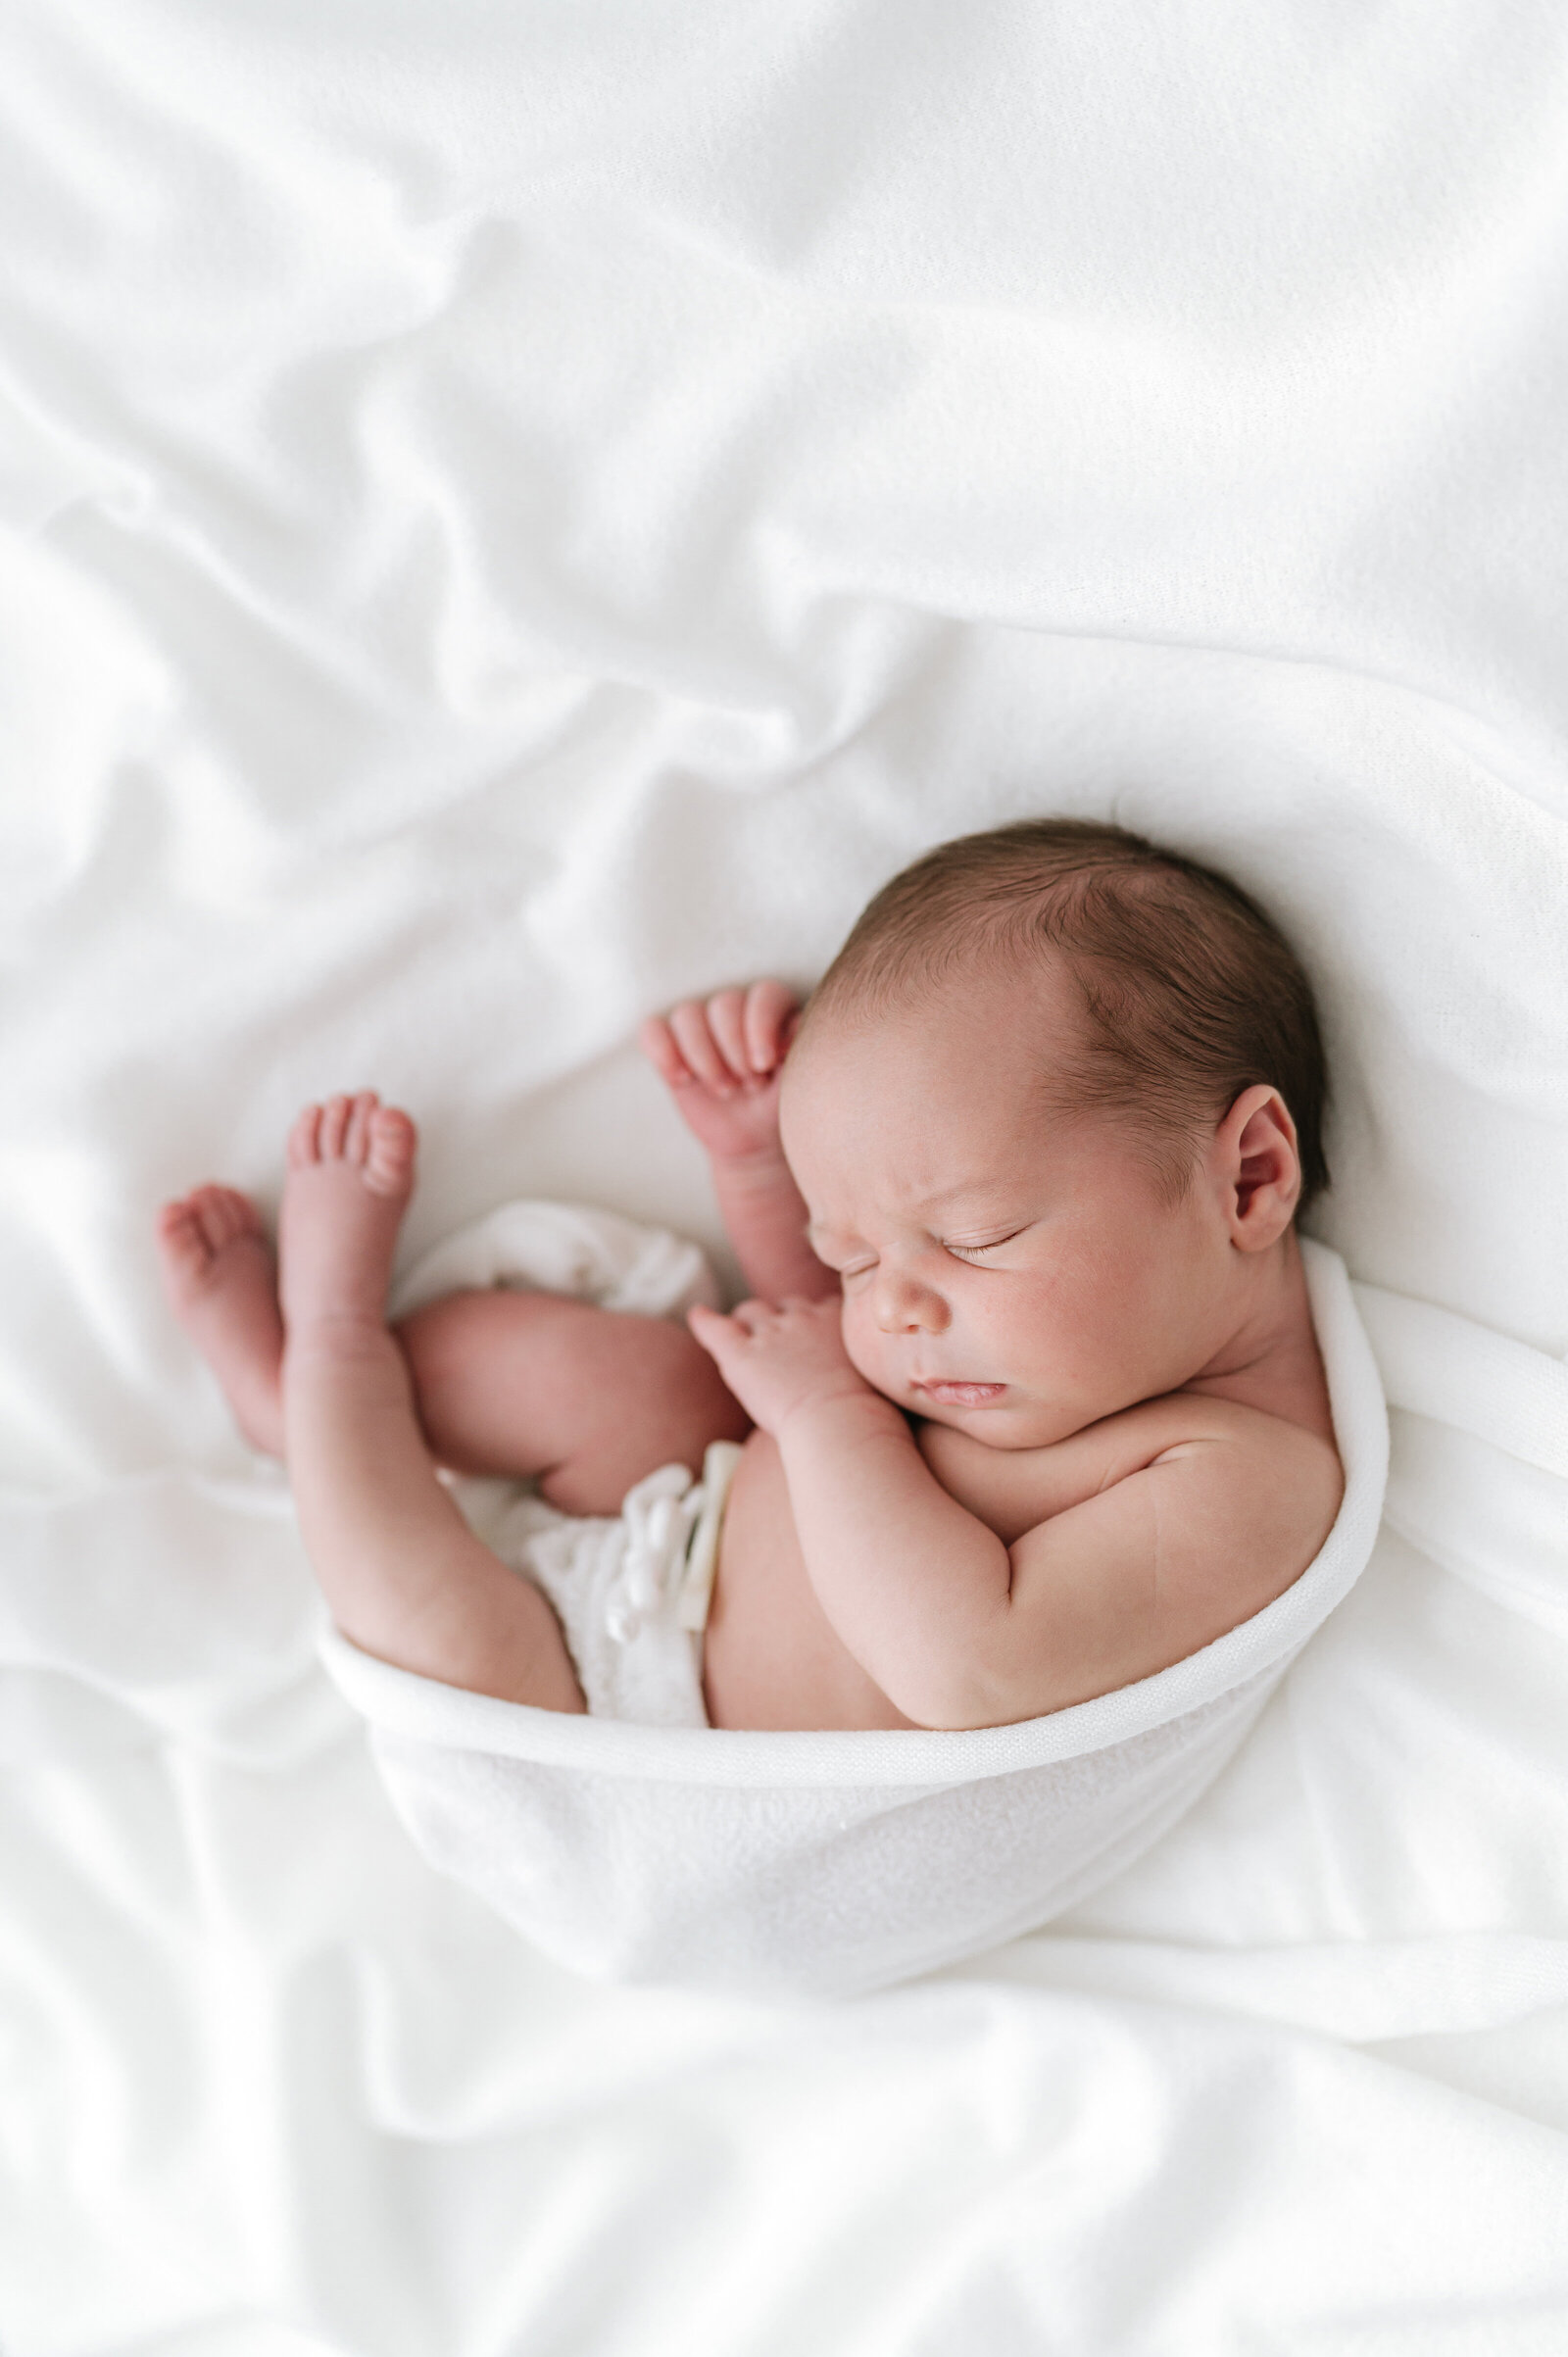 Artistic Bristol newborn photography of a baby on a white blanket